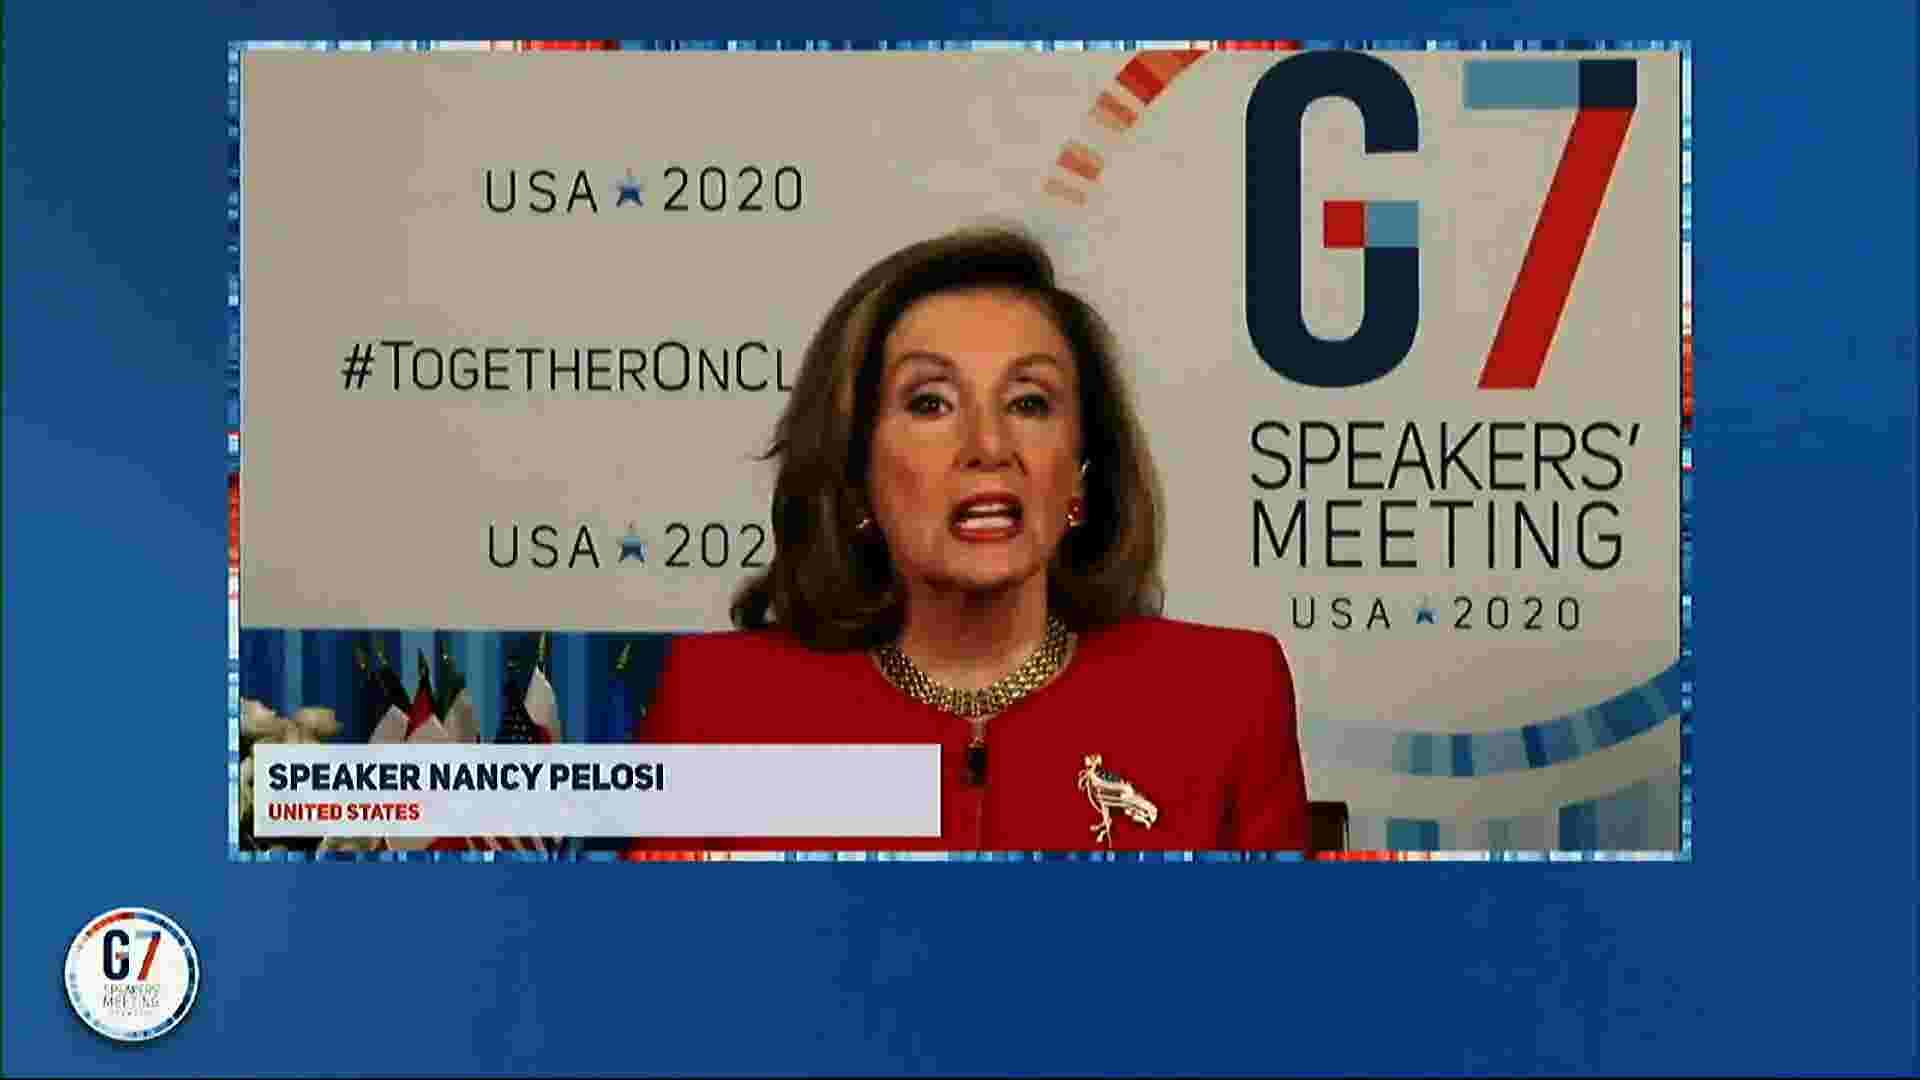 Pelosi: Global response needed for climate crisis